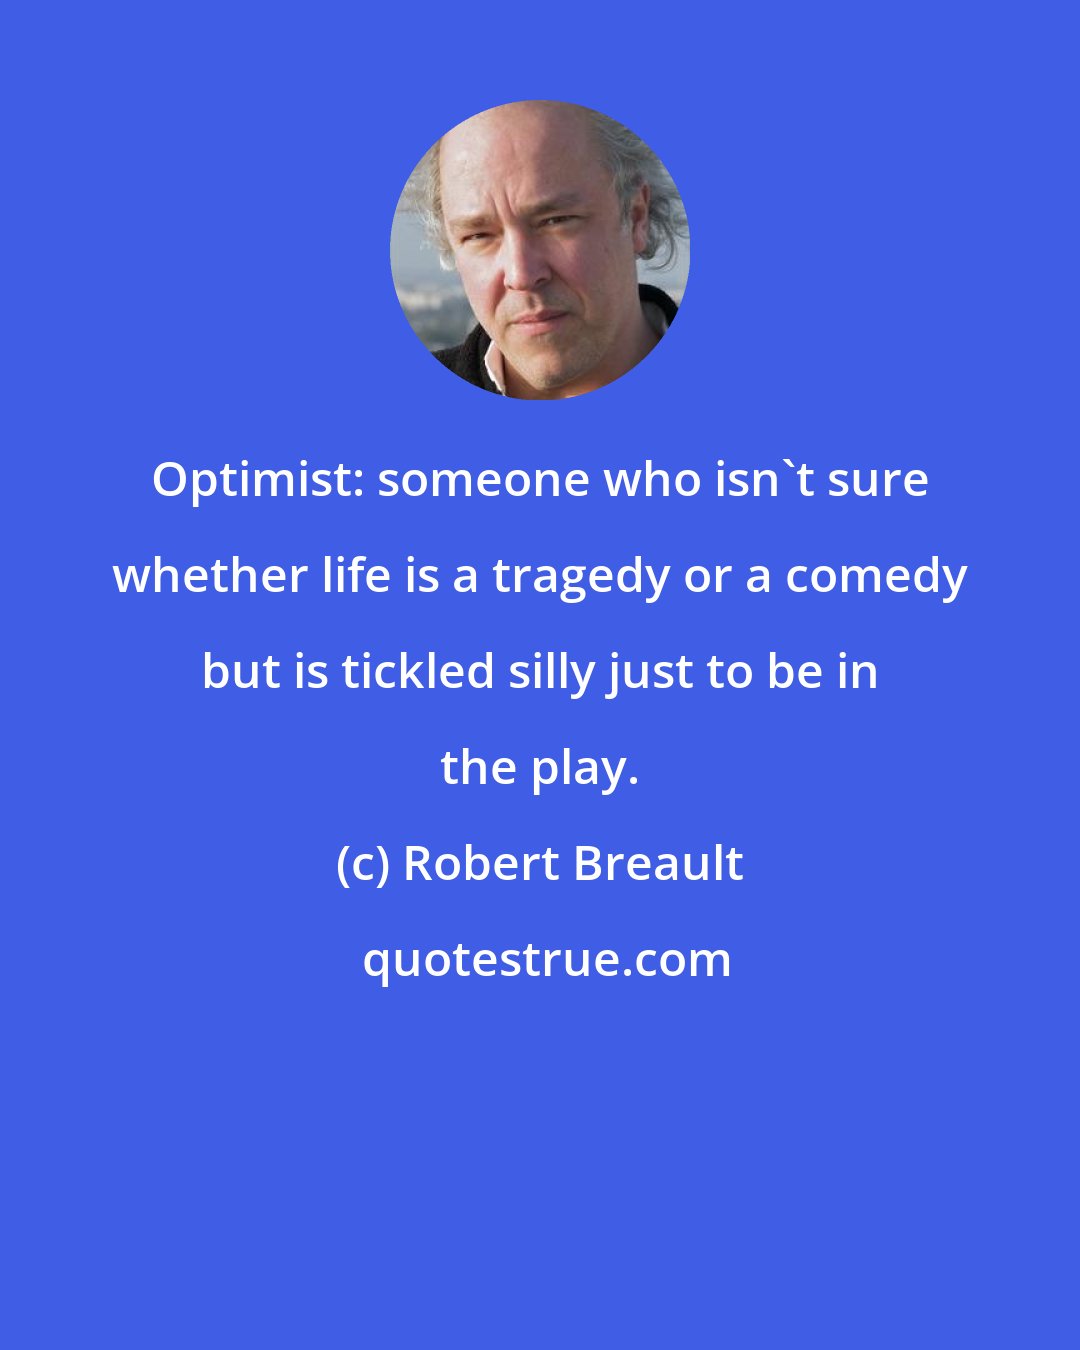 Robert Breault: Optimist: someone who isn't sure whether life is a tragedy or a comedy but is tickled silly just to be in the play.